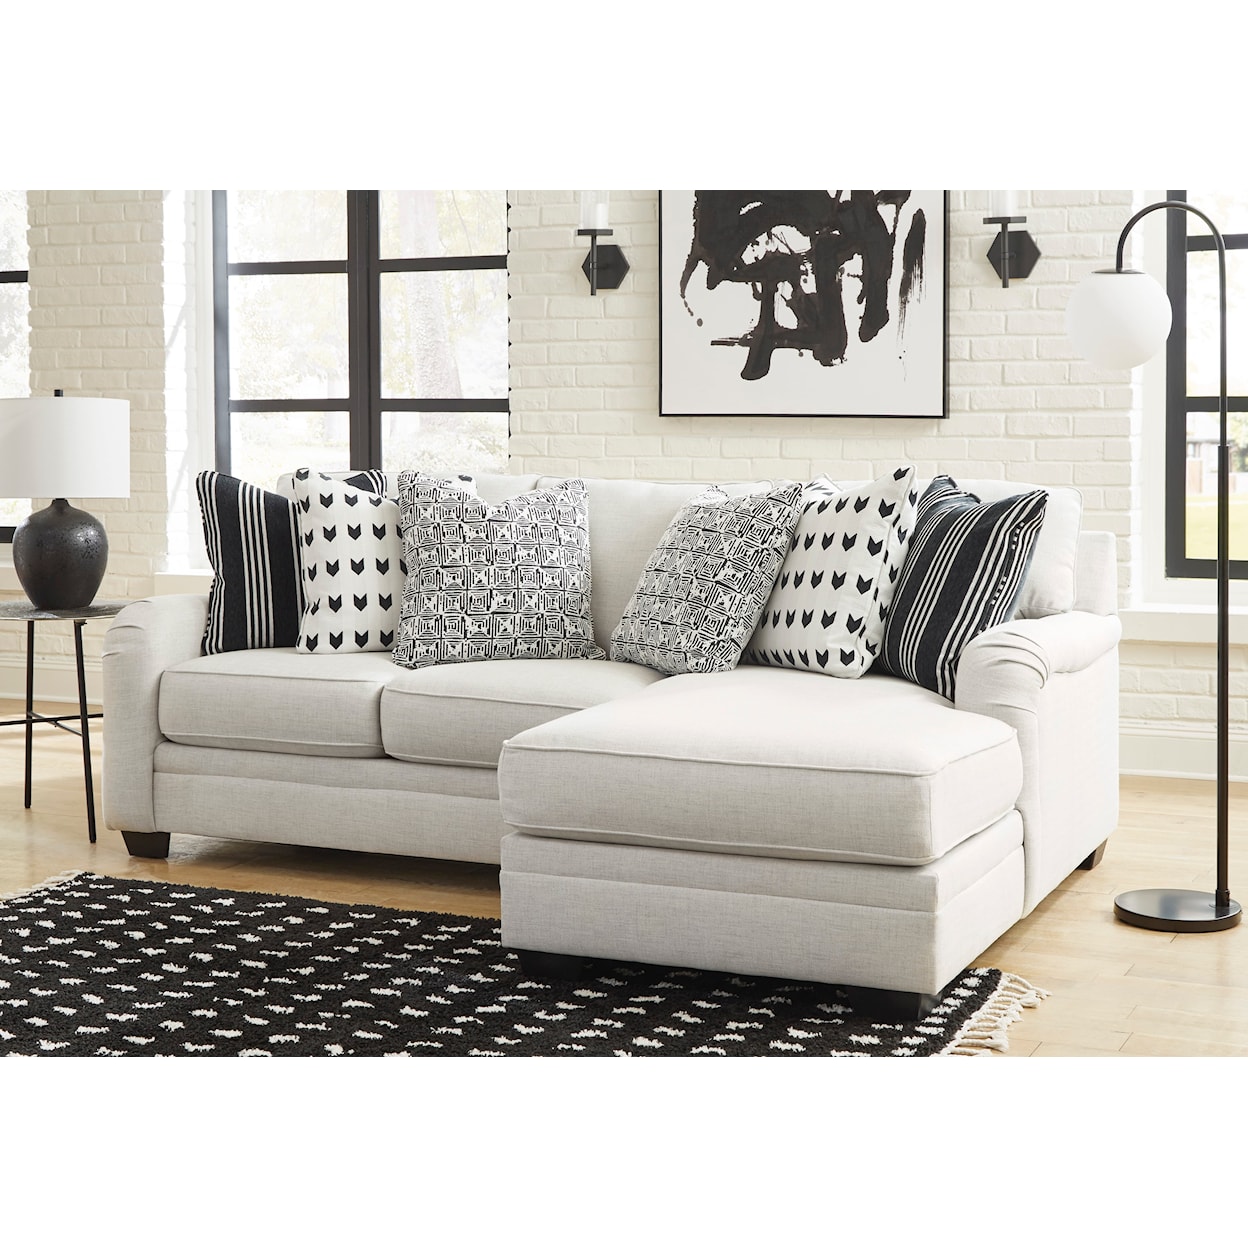 Signature Huntsworth 2-Piece Sectional with Chaise